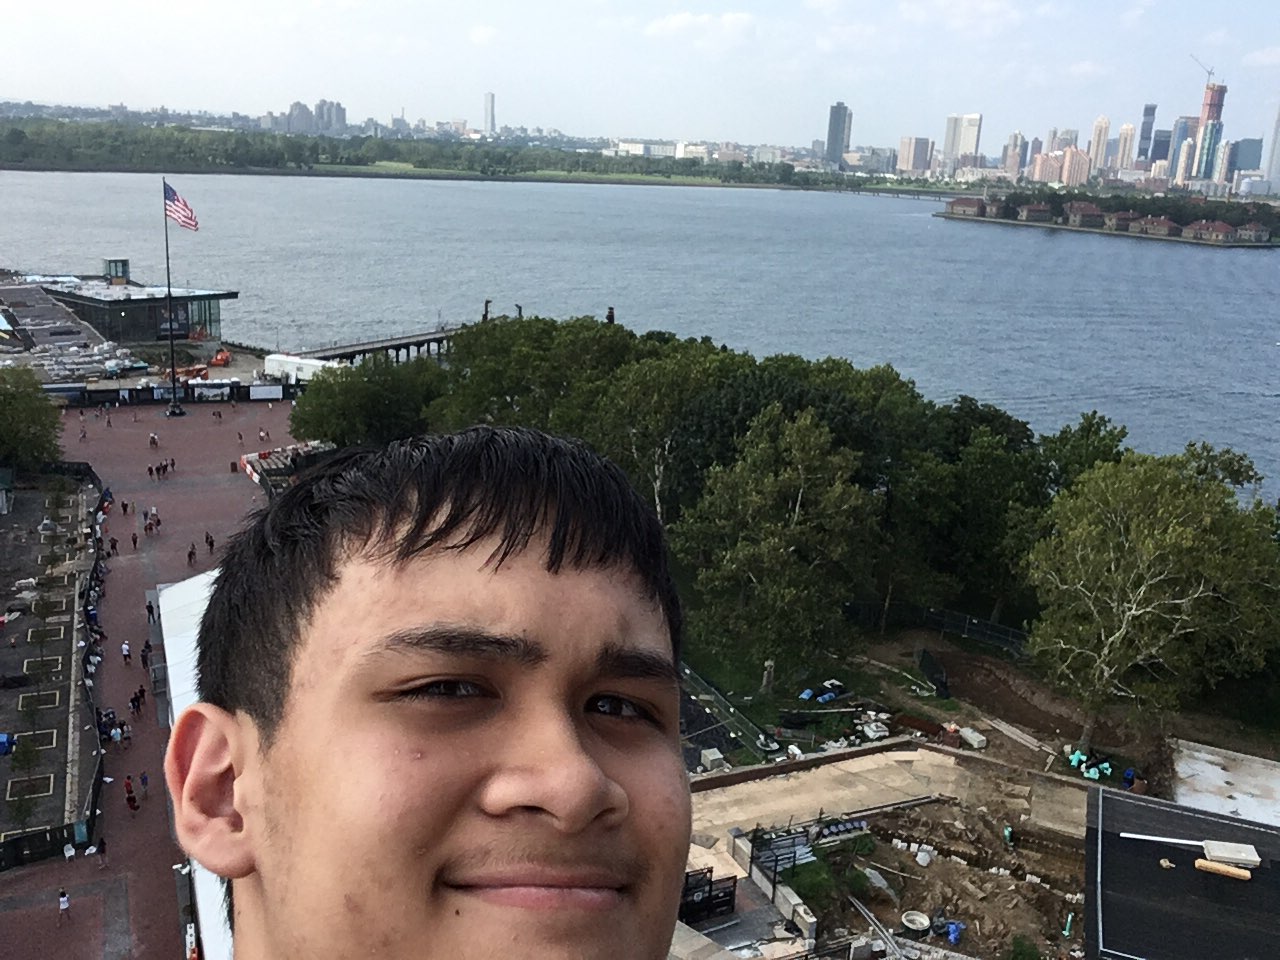 Anthony taking a selfie at new york city